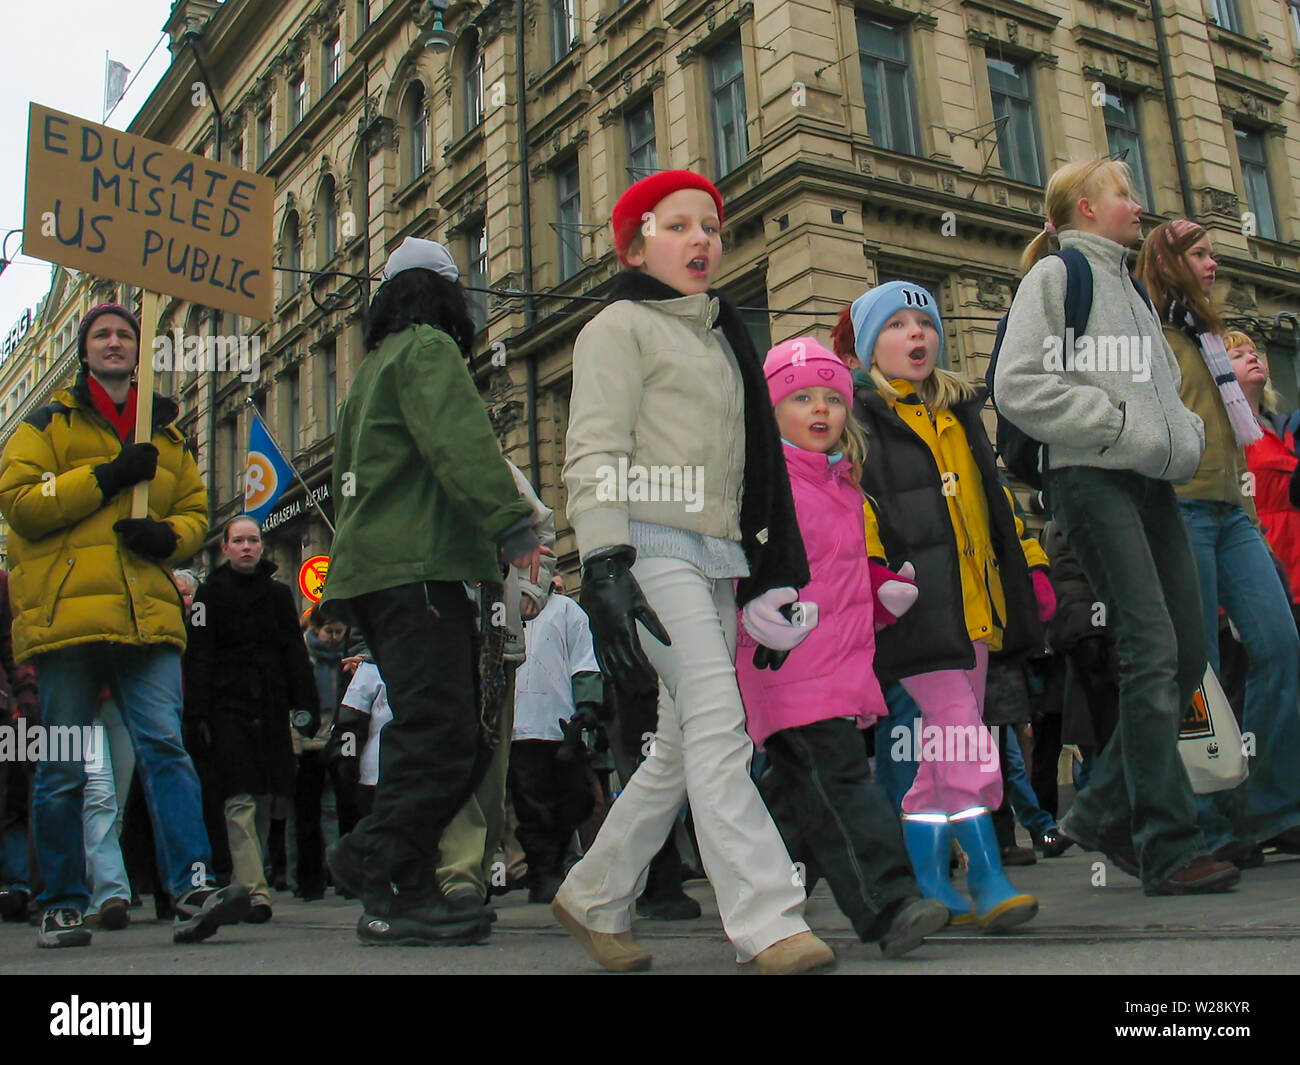 Helsinki, Finland - March 22, 2003: Anti-war protesters march through downtown Helsinki to protest the impending United States invasion of Iraq. Stock Photo